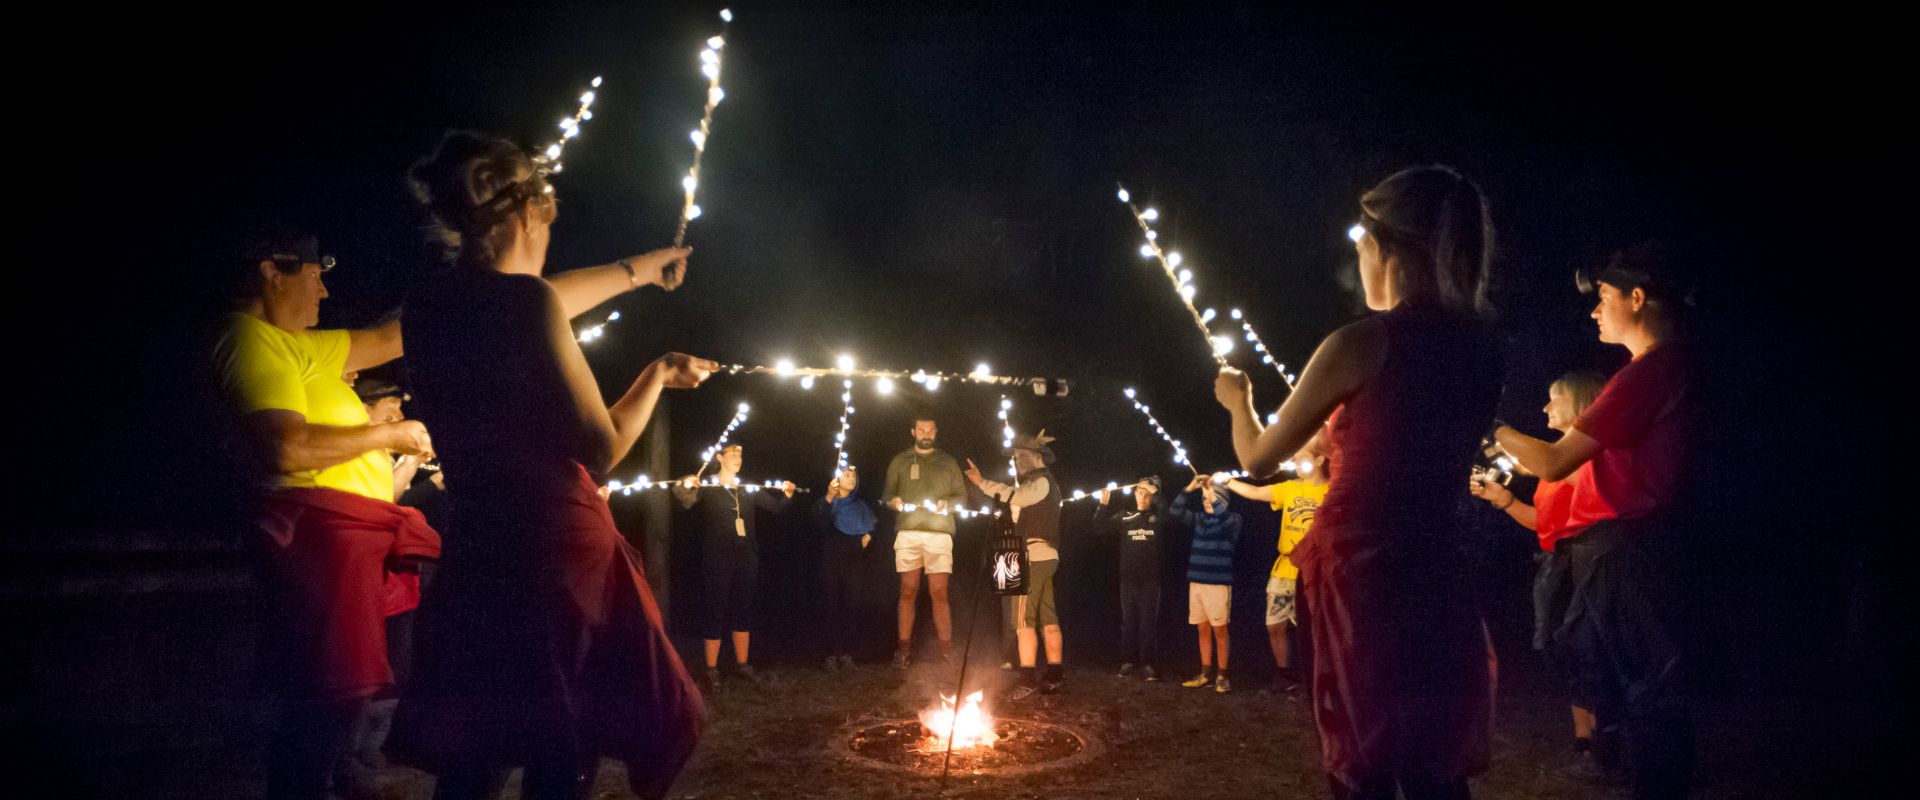 The audience stood in a circle around a fire, hold up bamboo canes covered in fairy lights, as The Huntsman tells them a story.